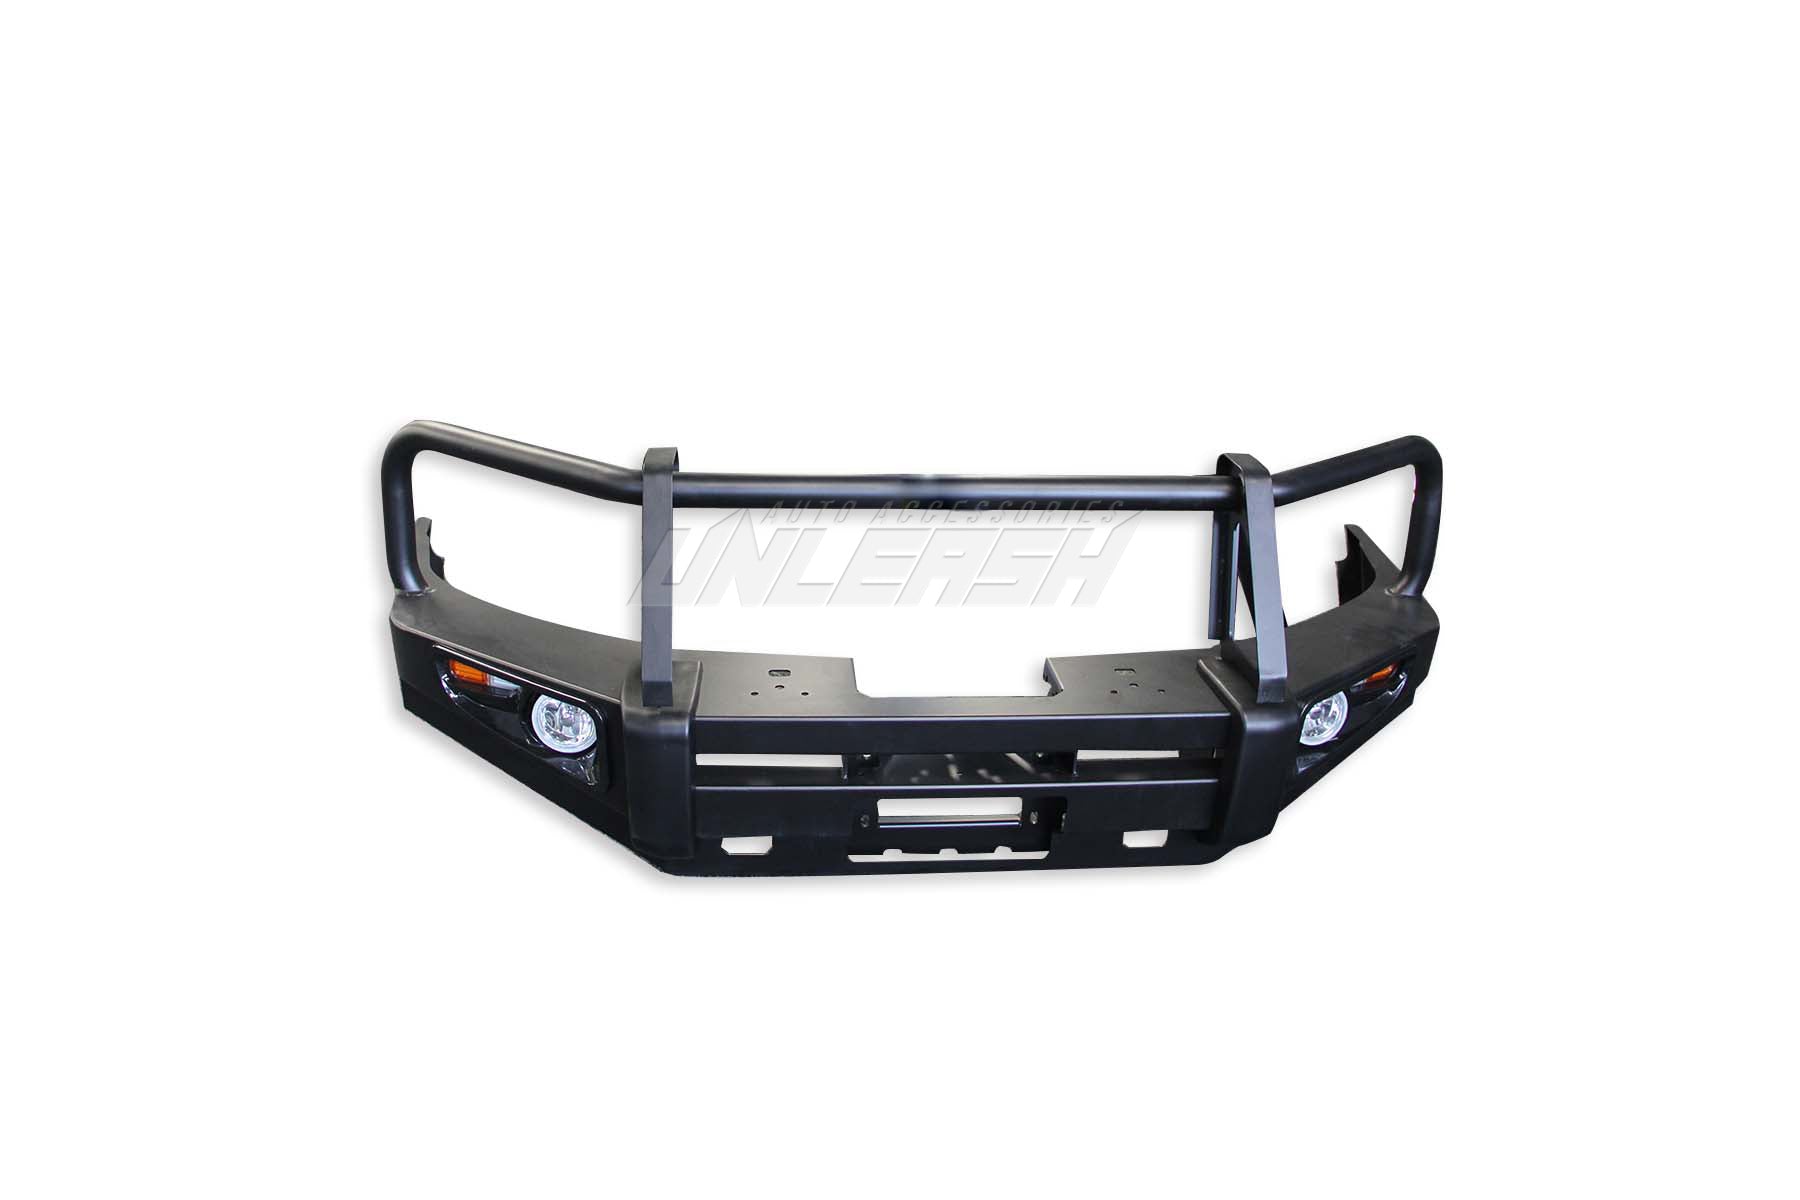 Triple Hoop Front Bumper Replacement Winch Bull bar for Holden Colorado 2012-2016